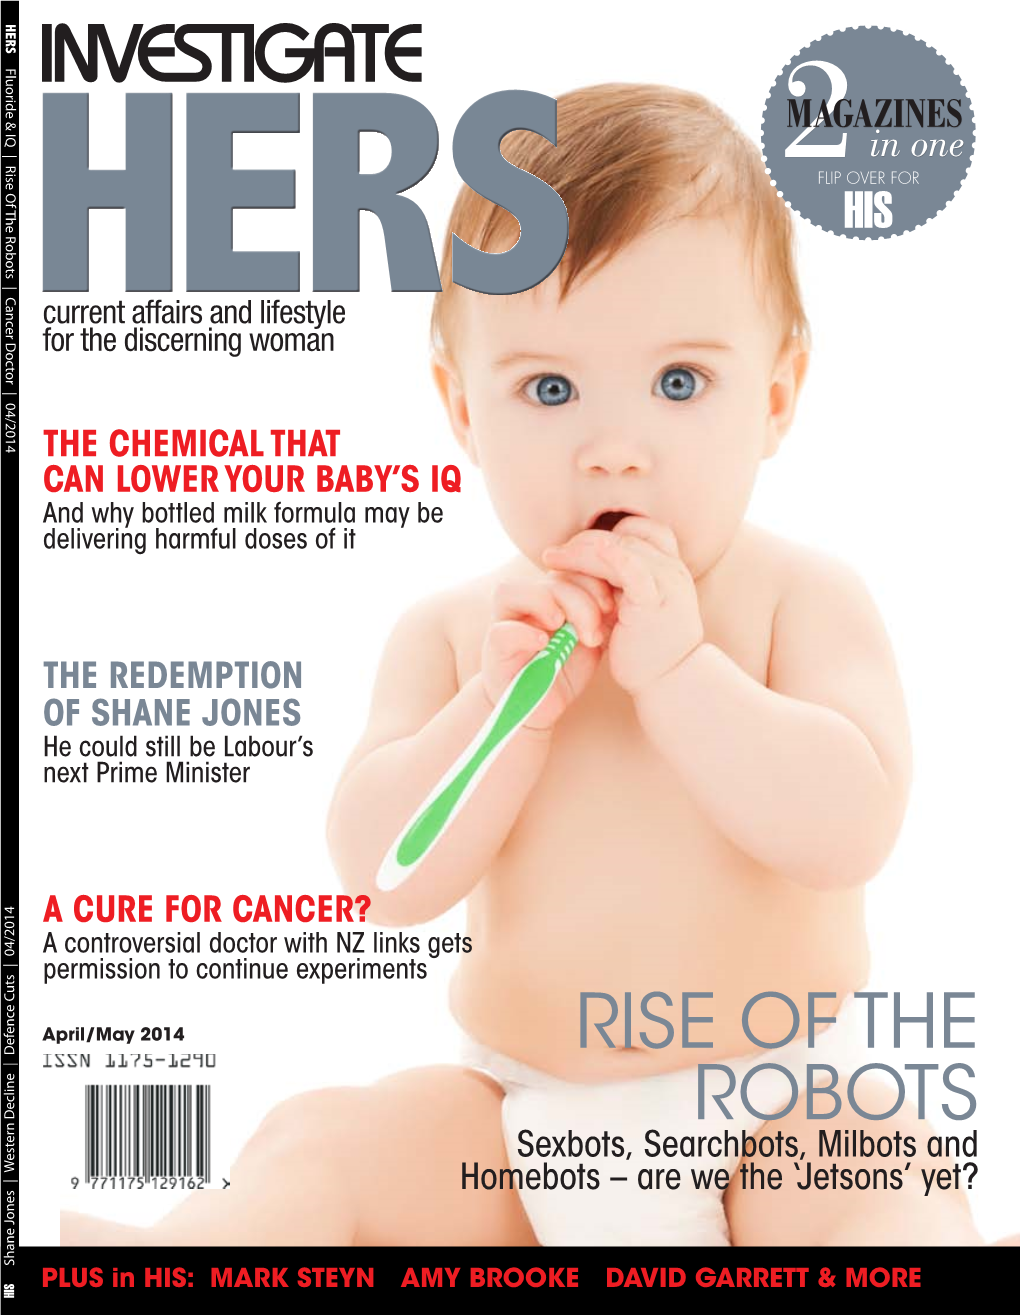 Rise of the Robots | Cancer Doctor | 04/2014 HIS April/May 2014 INVESTIGATEMAGAZINE.COM 49